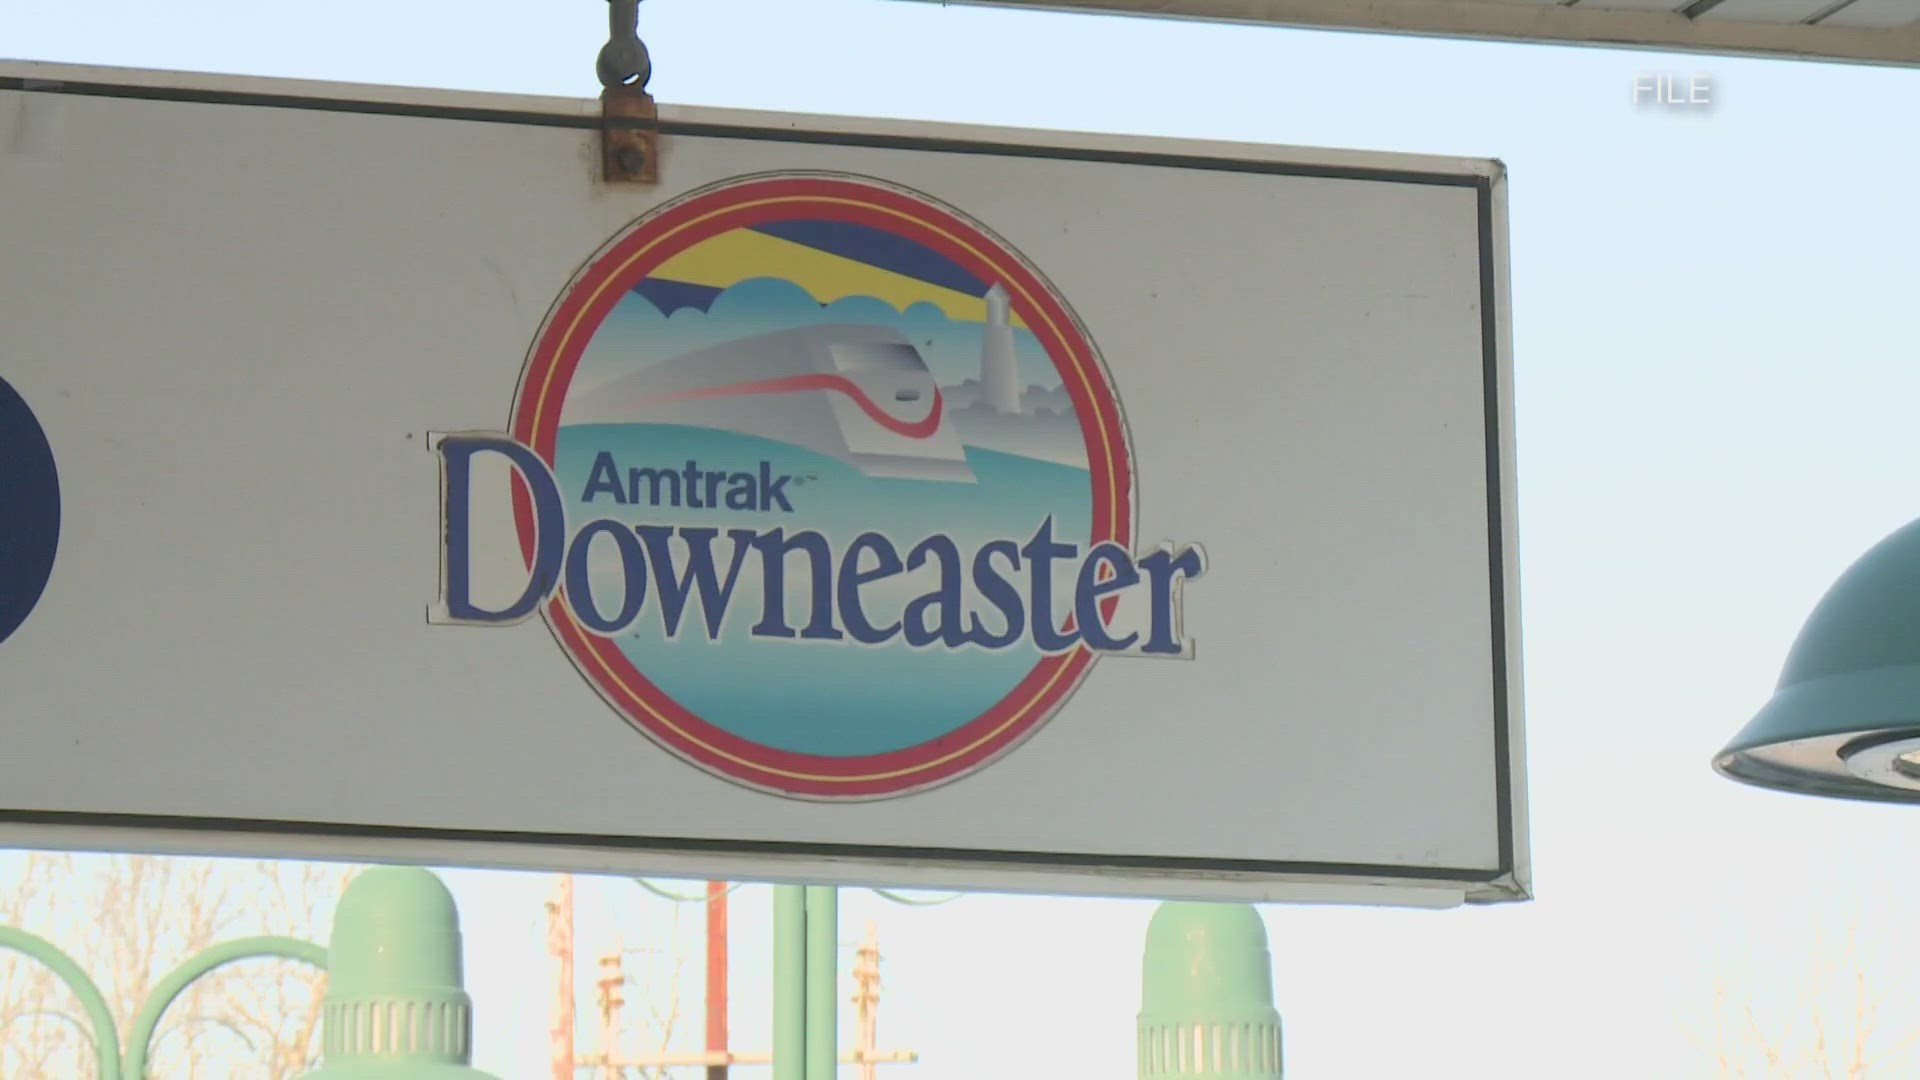 When NexDine was renewing its license to serve alcohol on the Downeaster, the company "inadvertently acknowledged" it'd been violating New Hampshire liquor laws.